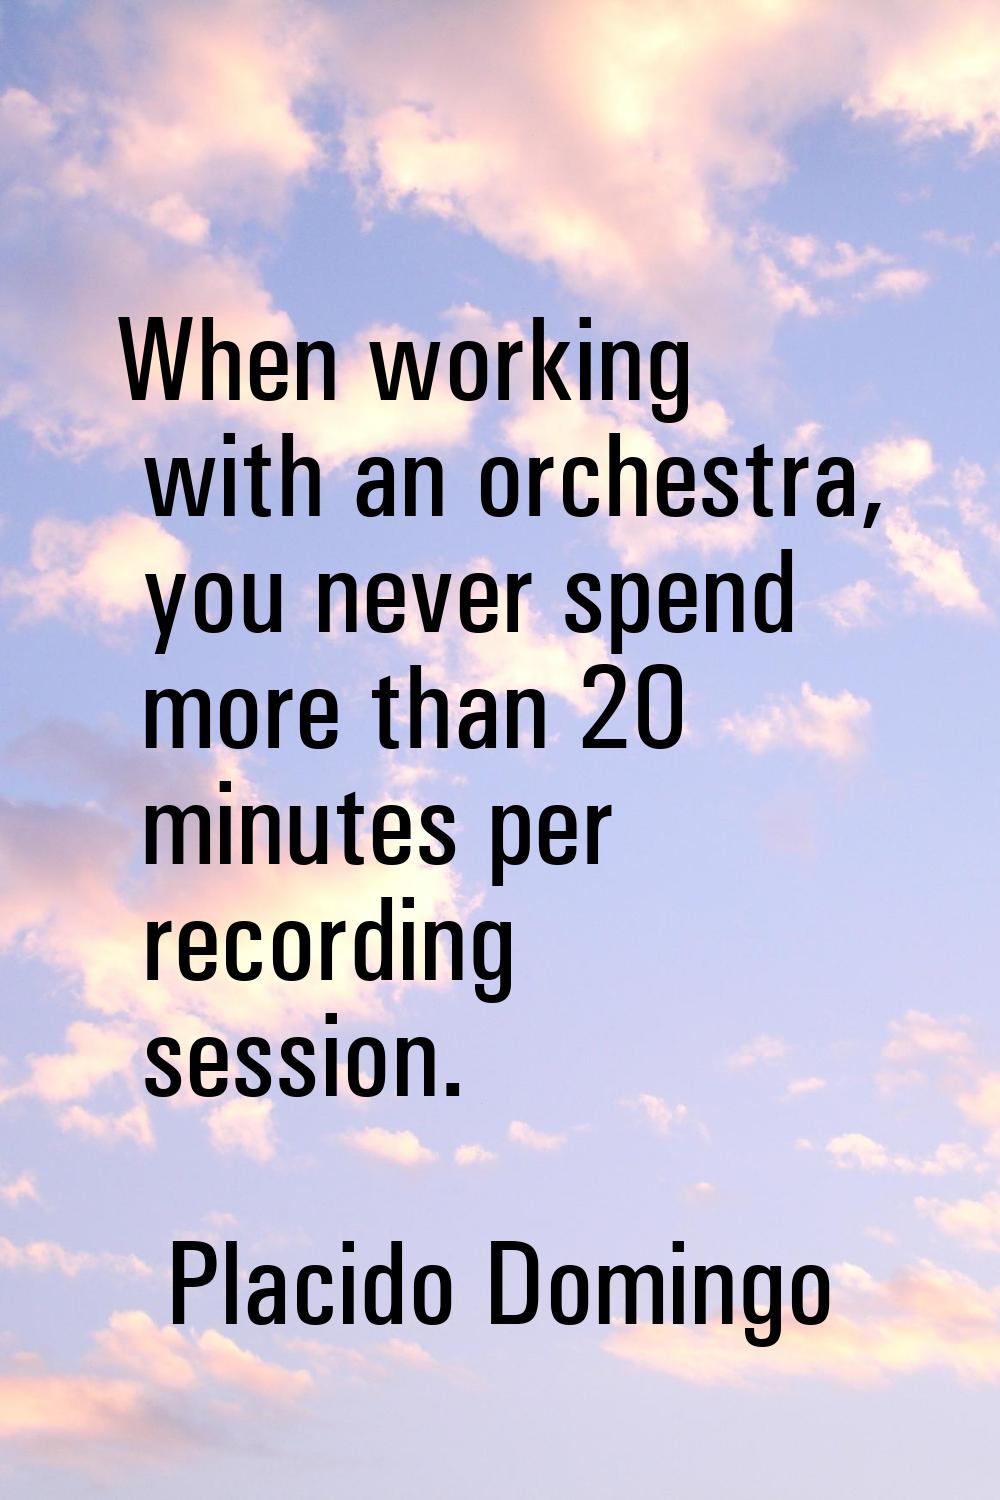 When working with an orchestra, you never spend more than 20 minutes per recording session.